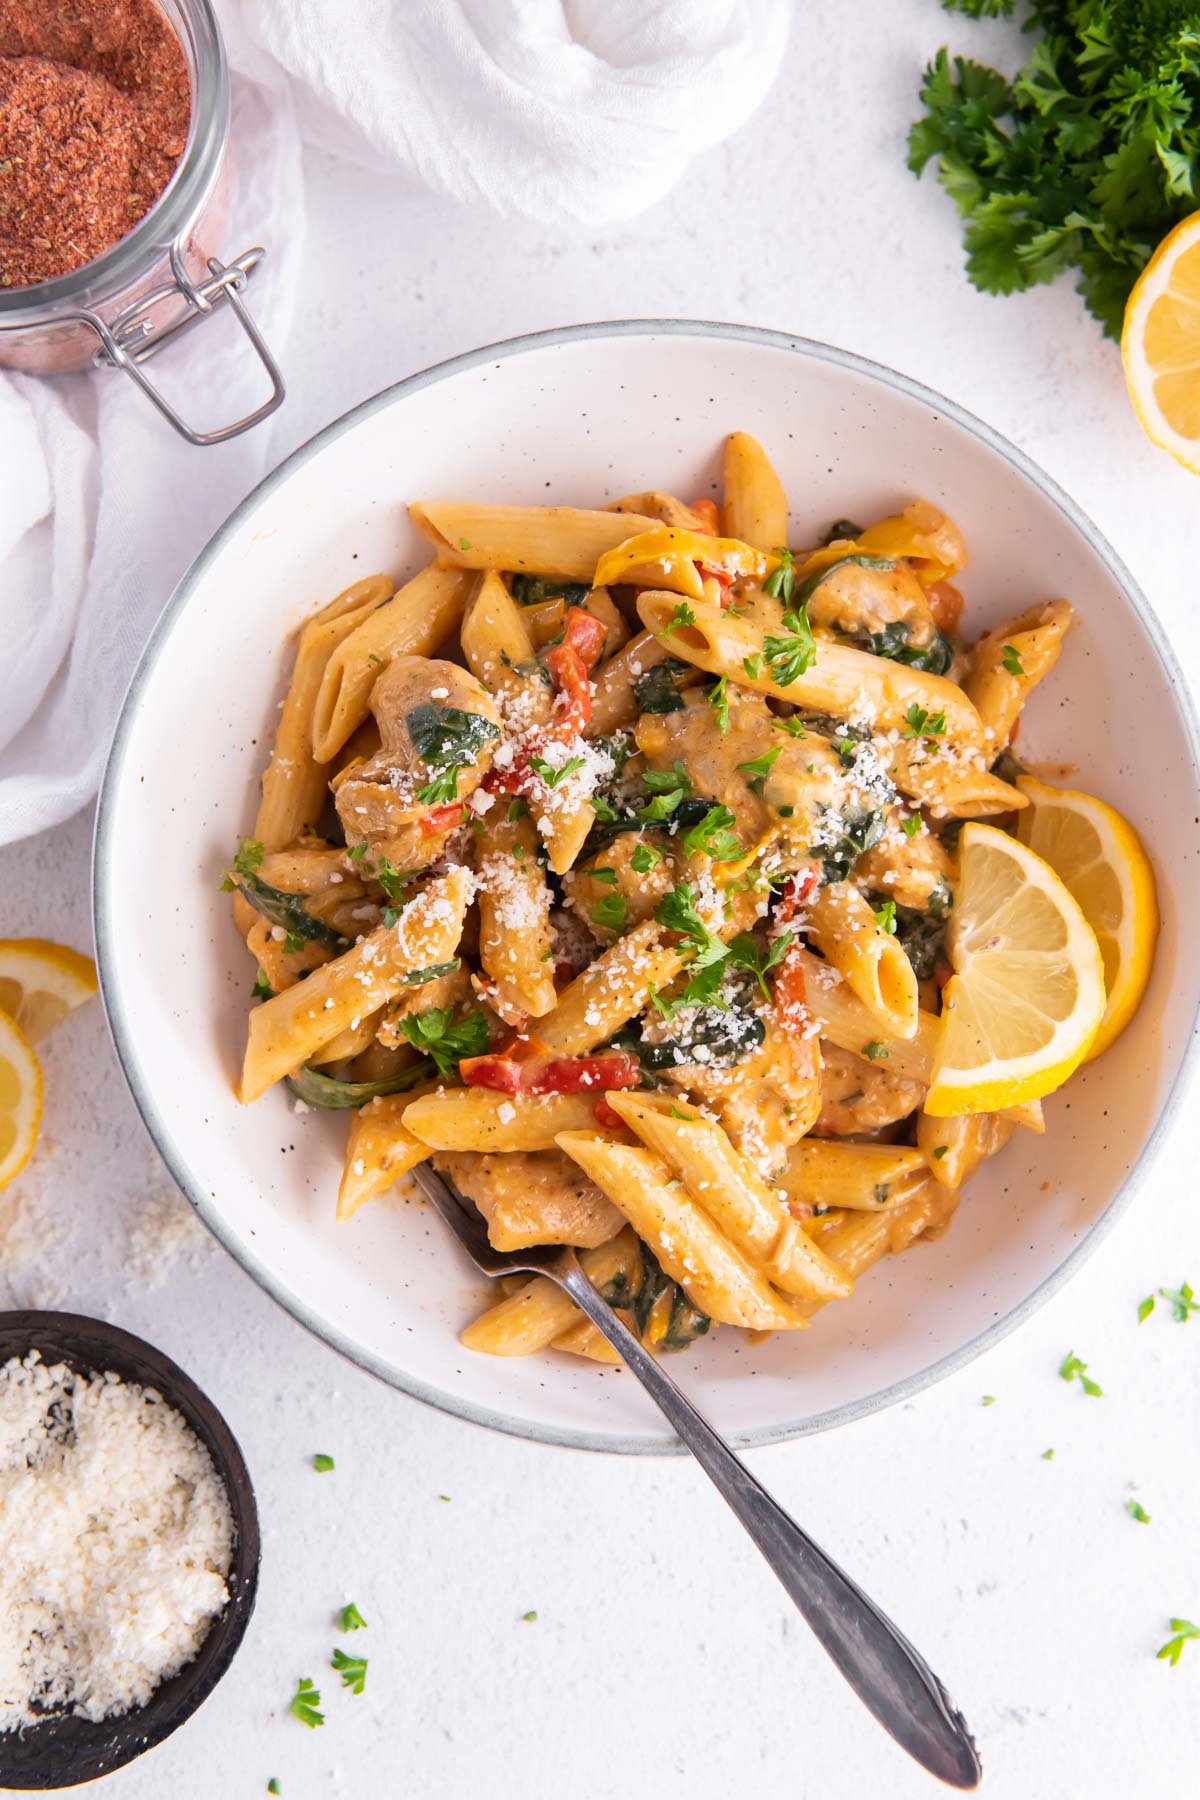 Cajun chicken pasta served in a bowl with grated Parmesan.